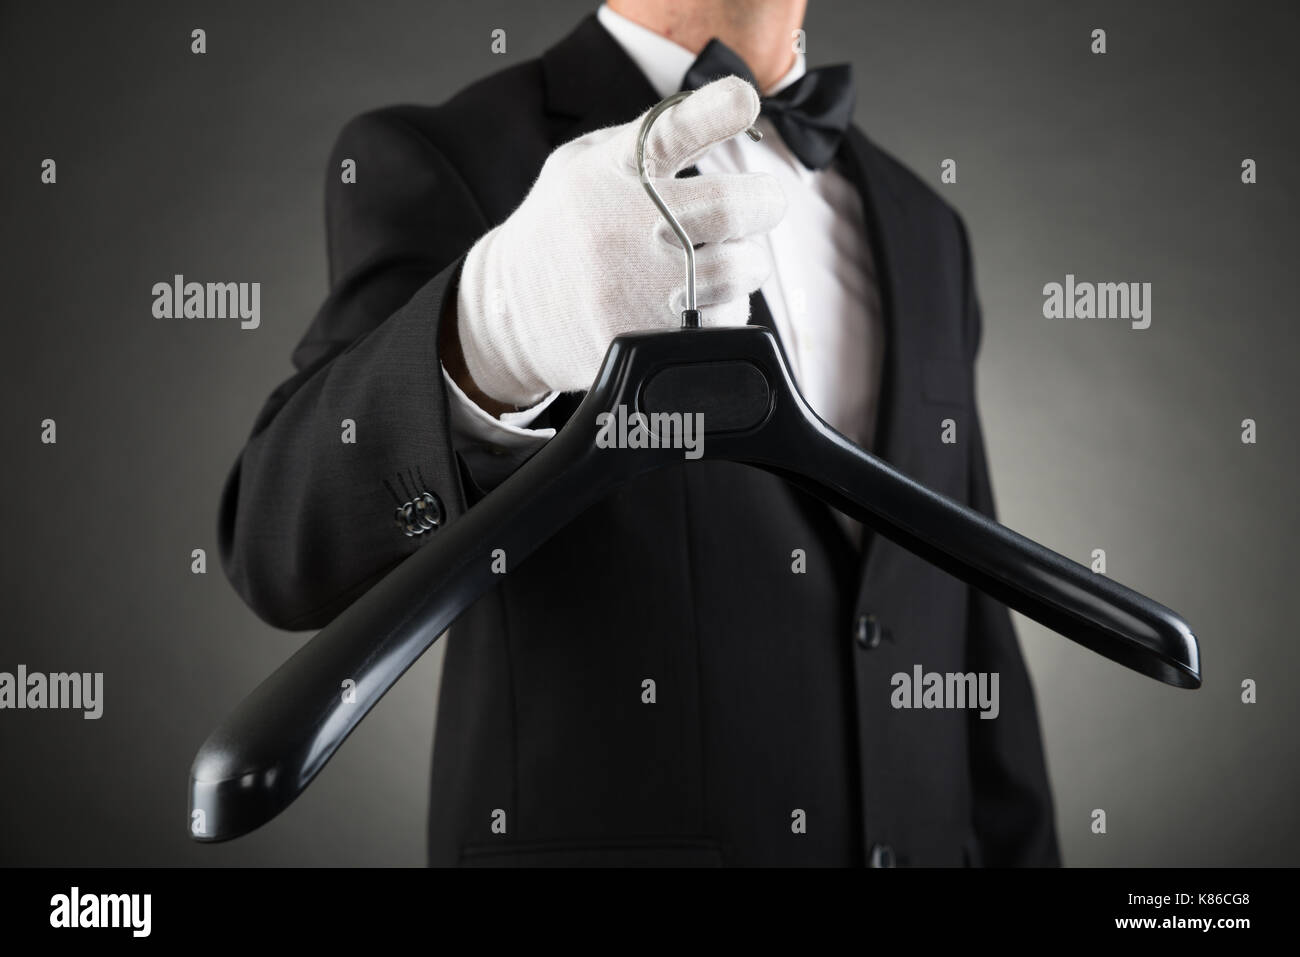 Close-up Of Housekeeper In Suit Holding Black Plastic Hanger Stock Photo